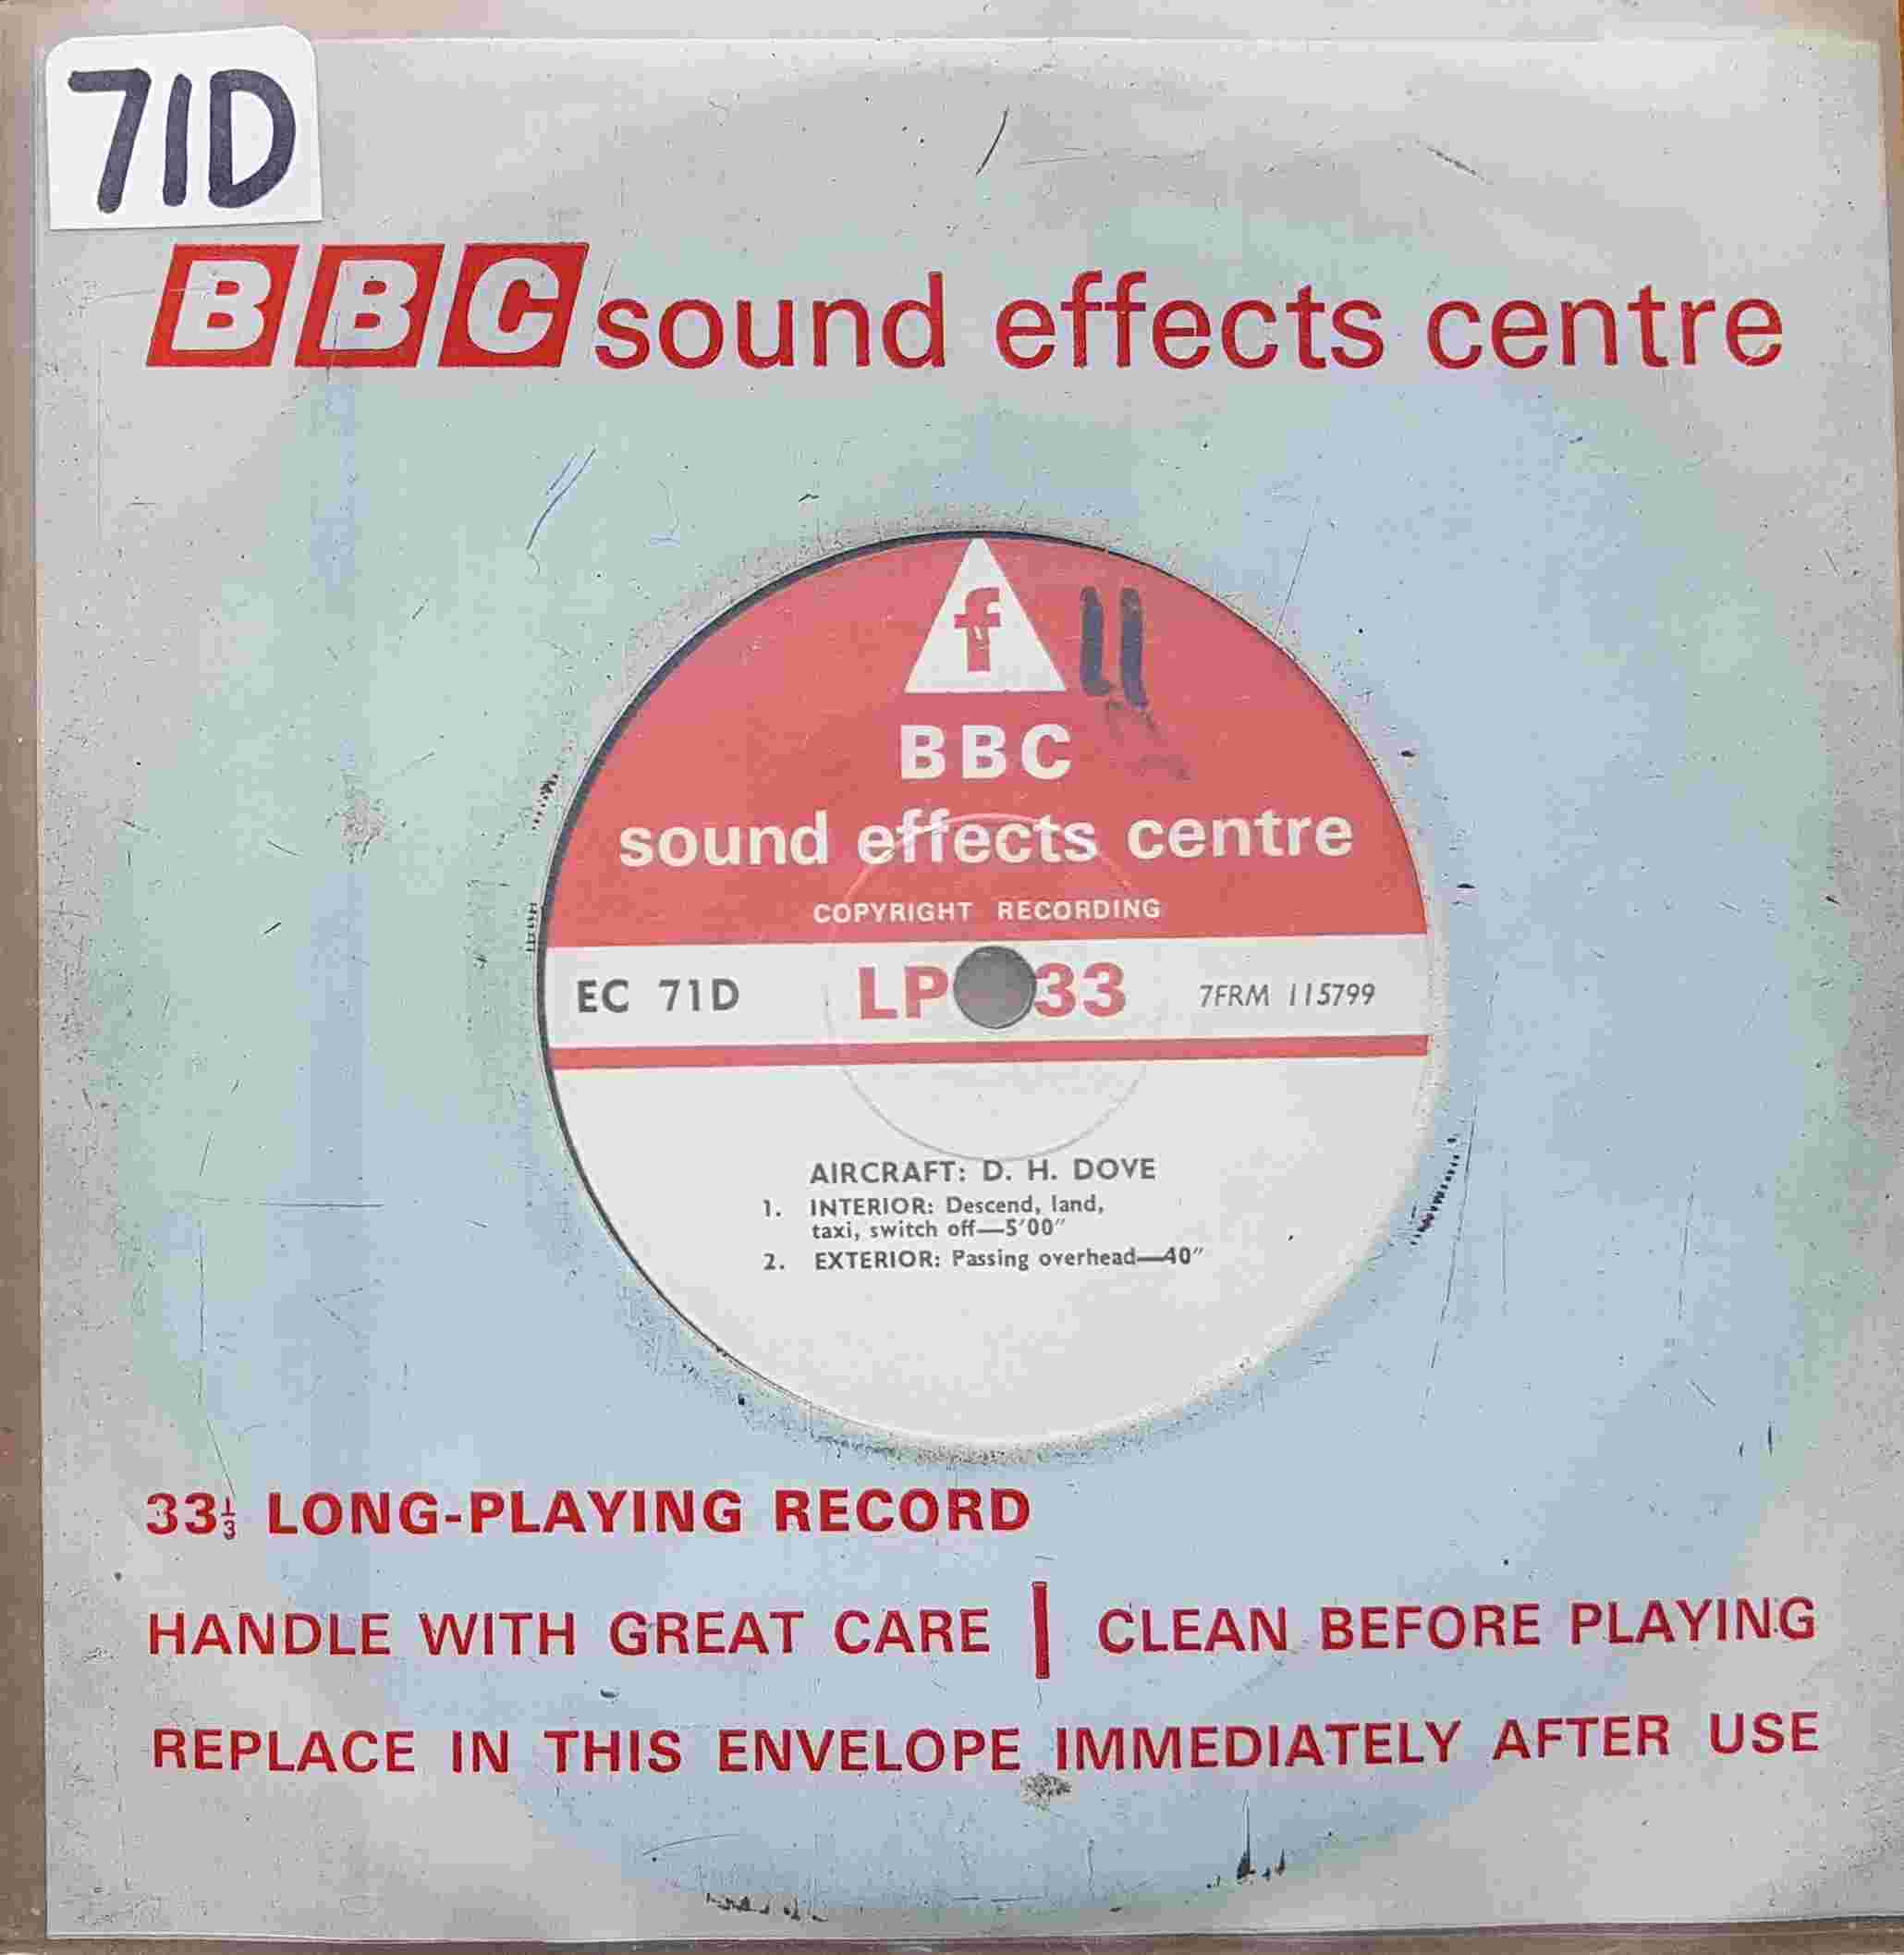 Picture of EC 71D Aircraft by artist Not registered from the BBC singles - Records and Tapes library